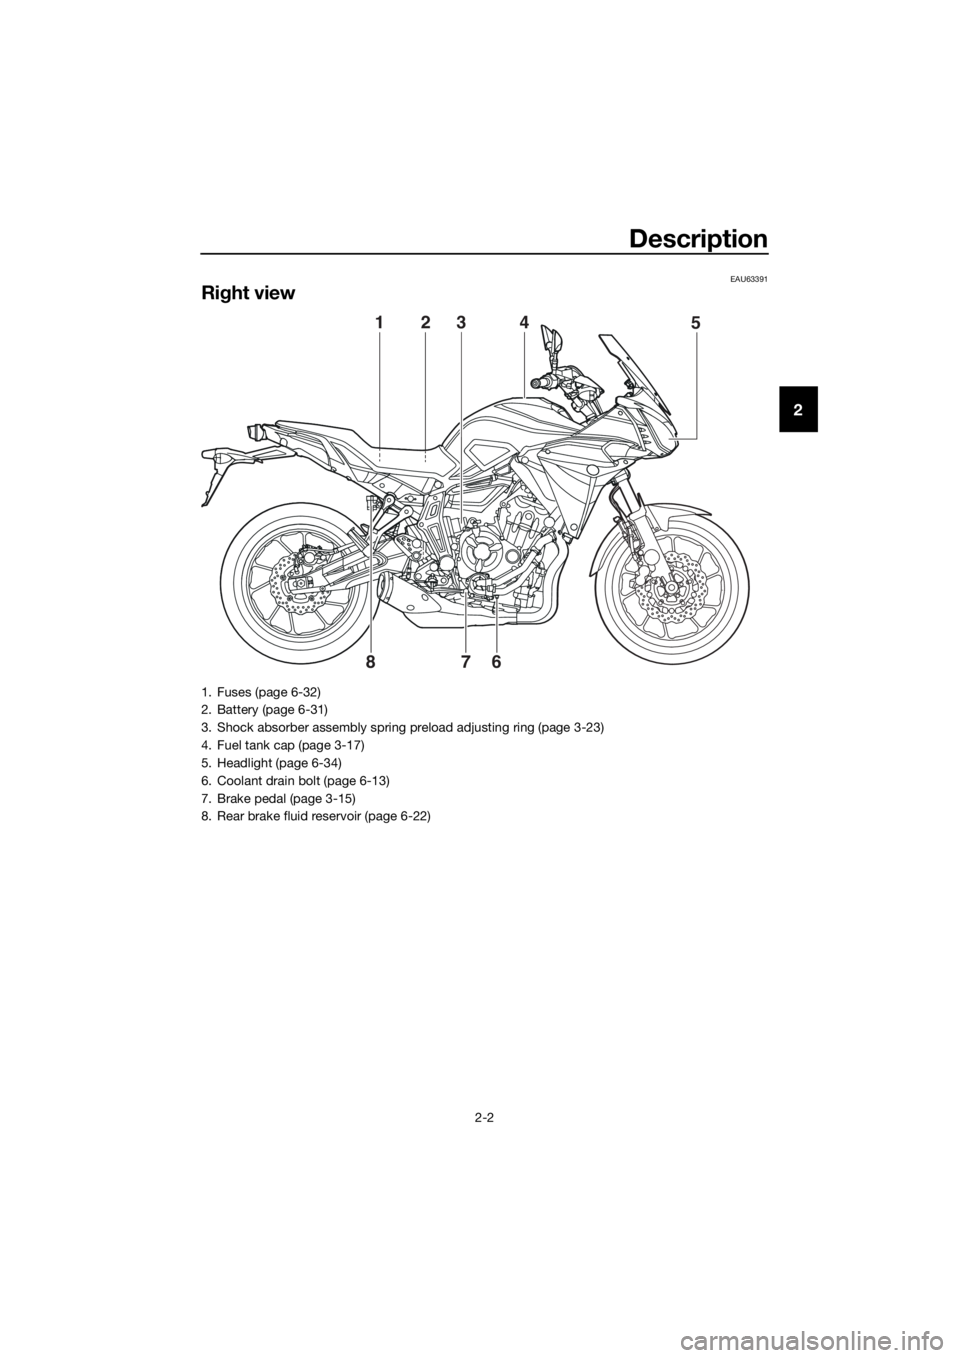 YAMAHA TRACER 700 2018  Owners Manual Description
2-2
2
EAU63391
Right view
215
6
7 8
34
1. Fuses (page 6-32)
2. Battery (page 6-31)
3. Shock absorber assembly spring preload adjusting ring (page 3-23)
4. Fuel tank cap (page 3-17)
5. Head